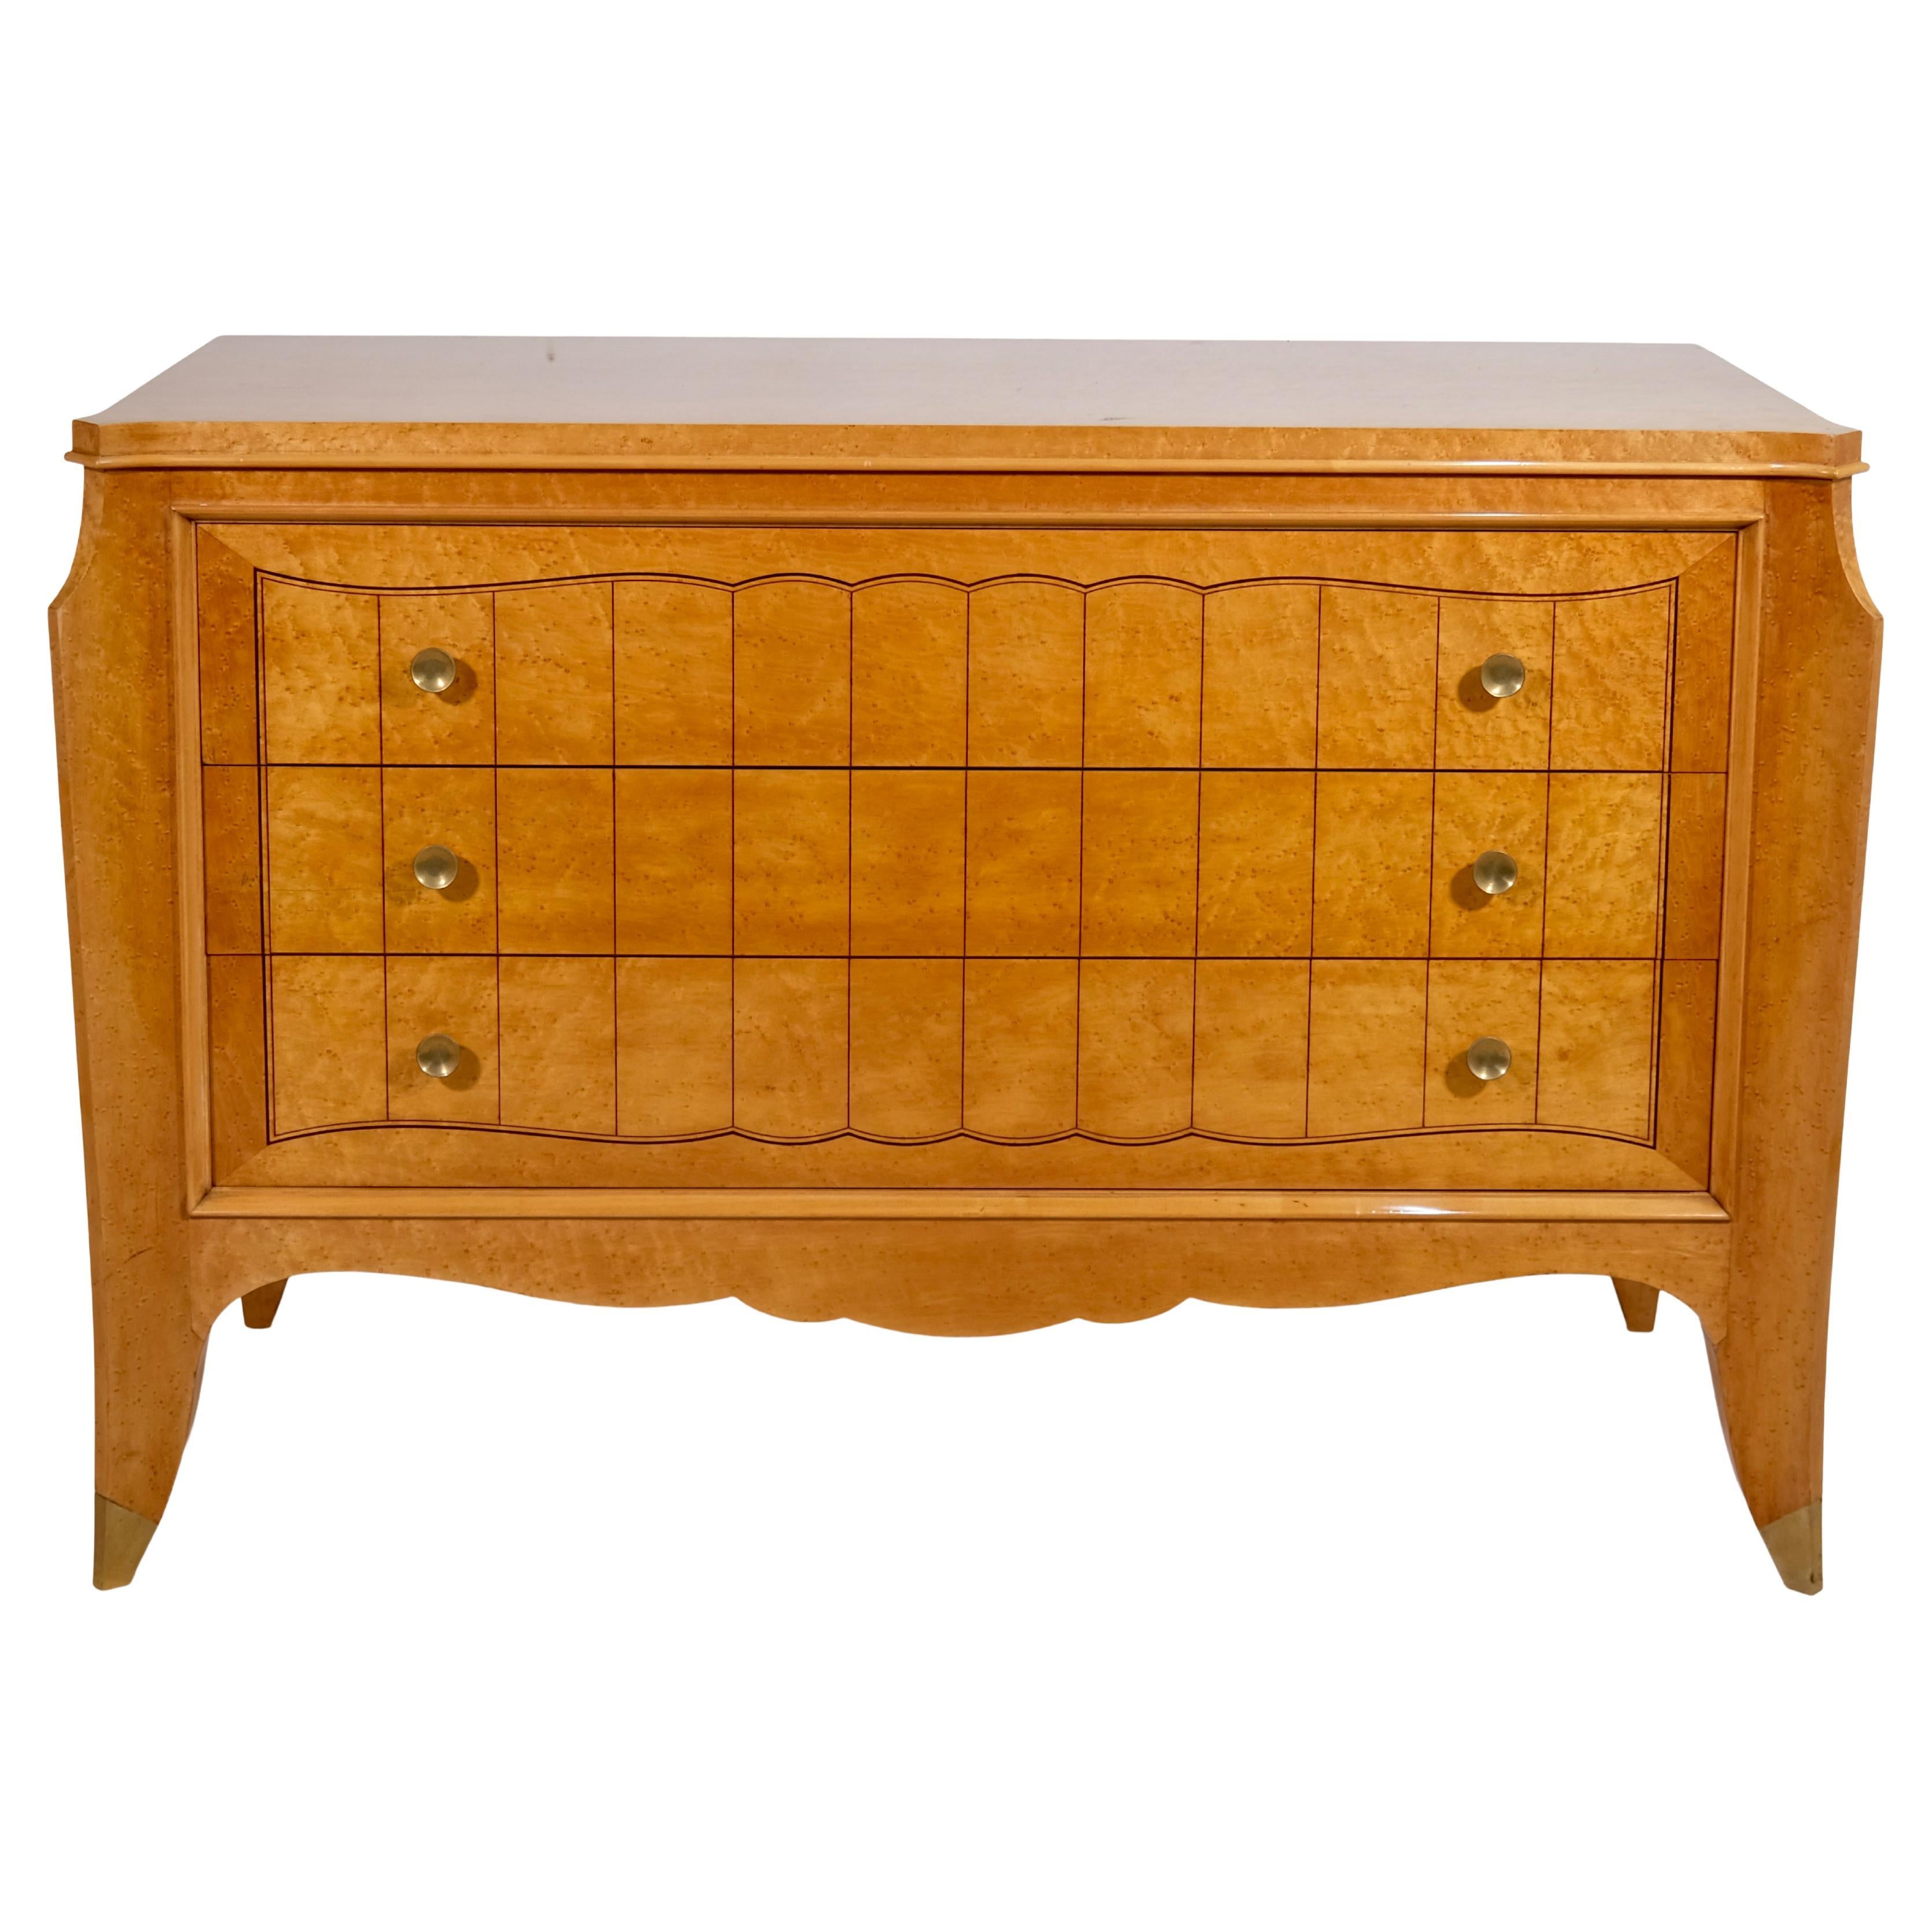 French 1930s Jean Pascaud Art Deco Chest Of Drawers in Birdseye Maple